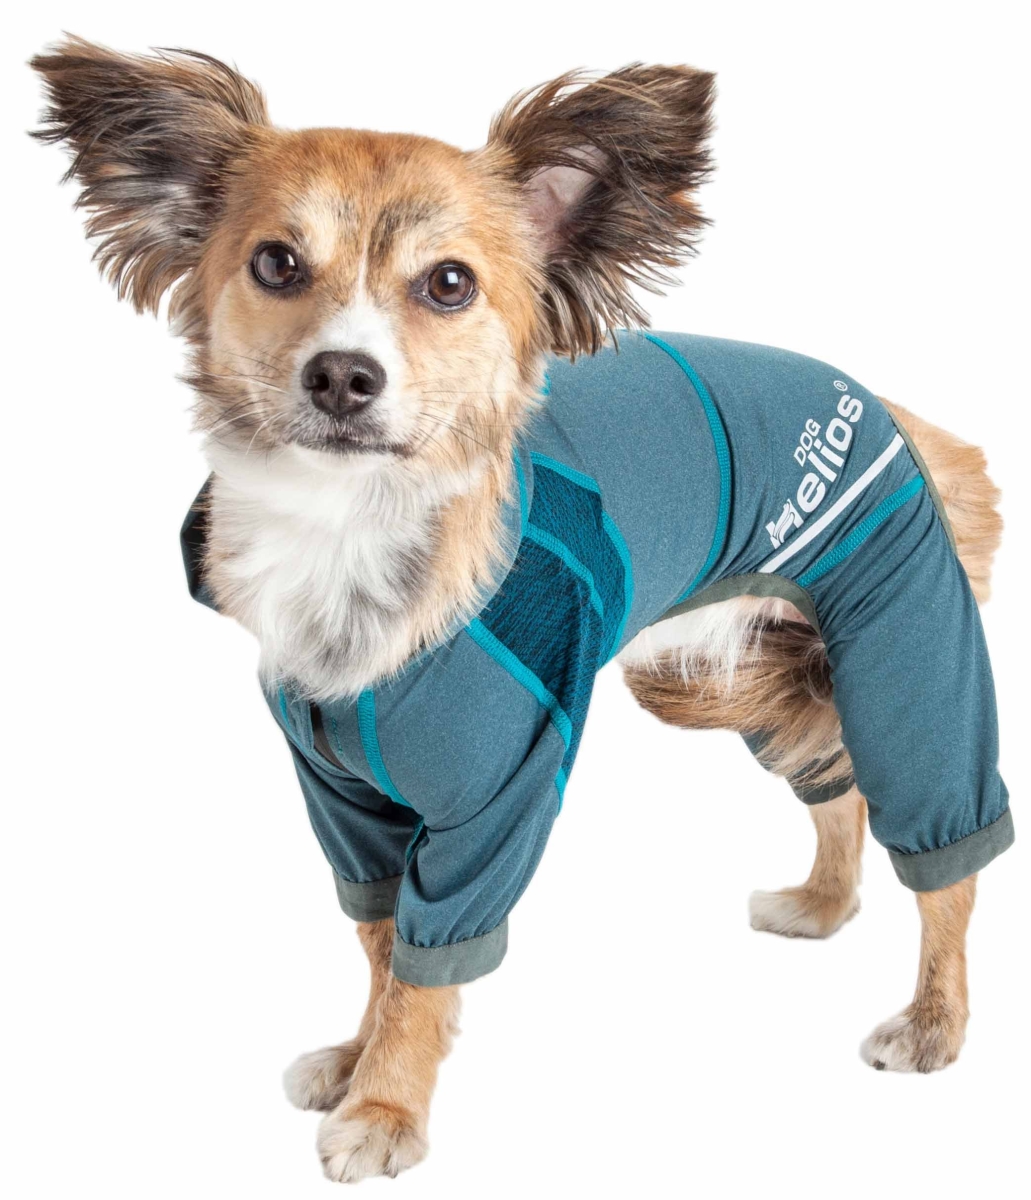 Yghl7tlxs Namastail 4-way Stretch Breathable Full Bodied Performance Yoga Dog Hoodie Tracksuit - Teal & Blue, Extra Small